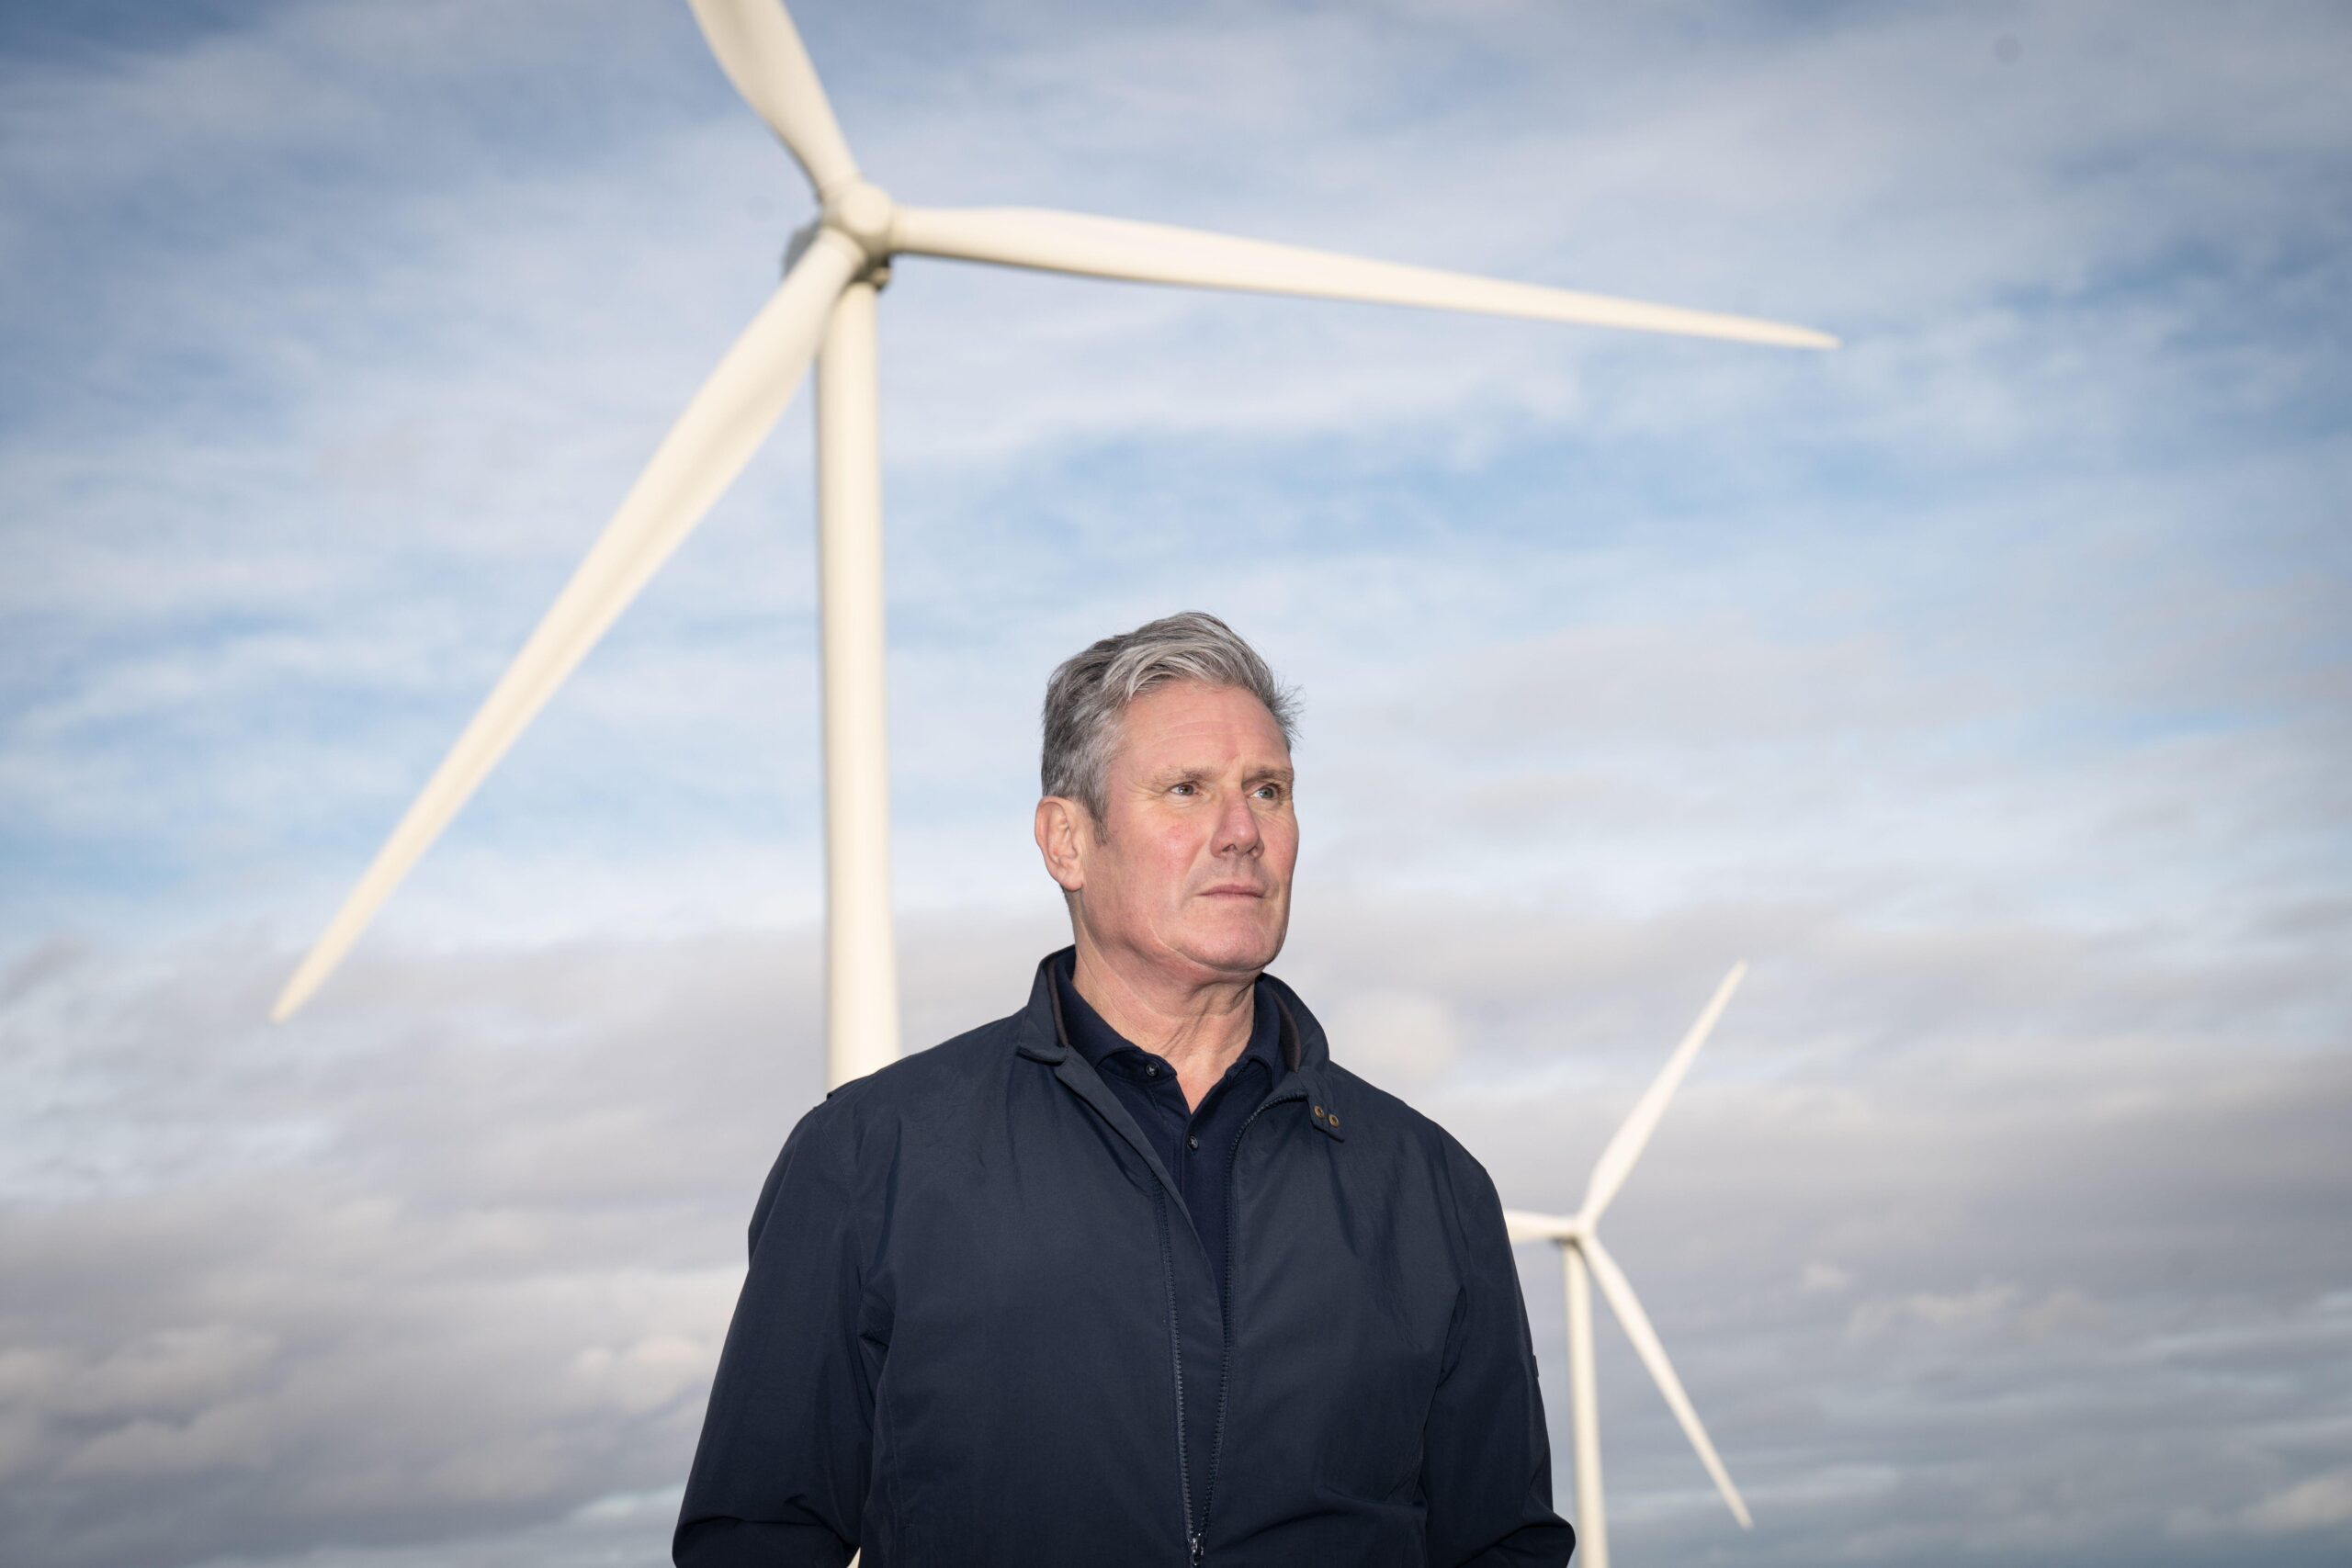 Keir Starmer stands in front of some wind turbines at an on-shore wind farm near Grimsby.